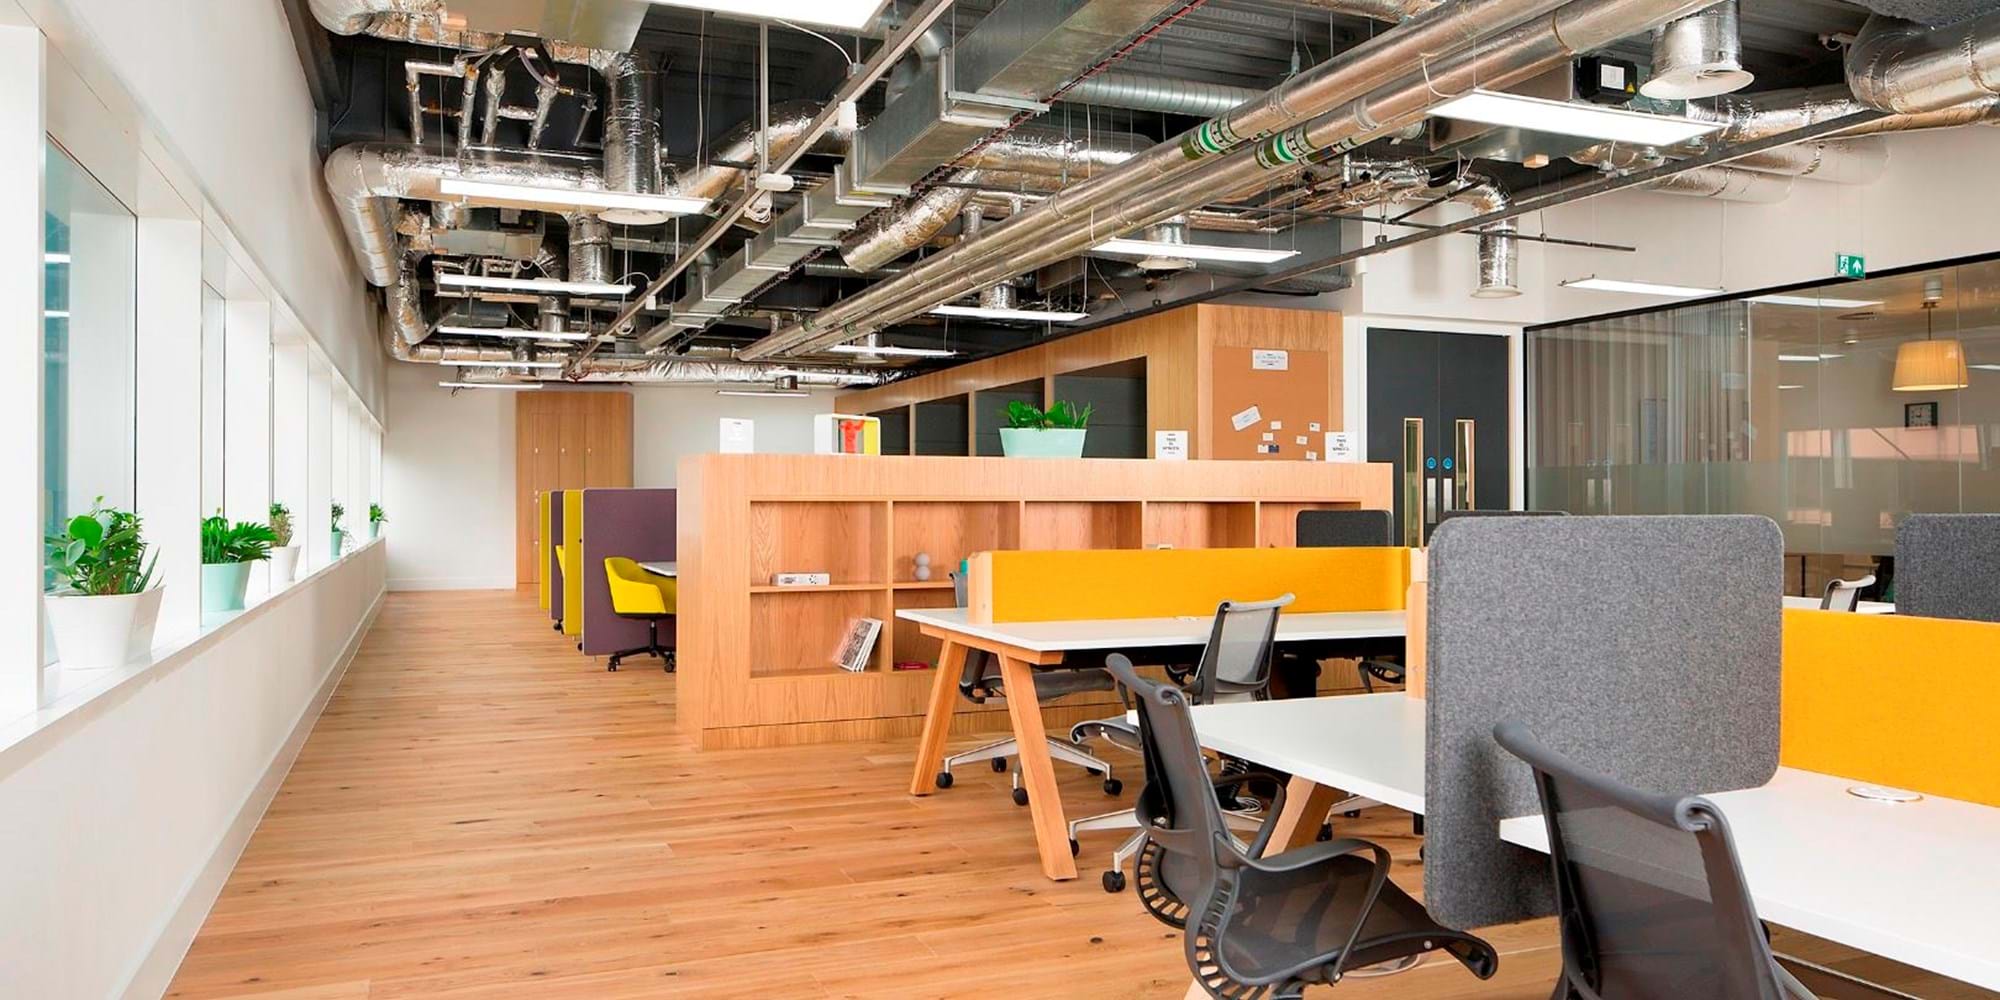 Modus Workspace office design, fit out and refurbishment - Spaces - Glasgow - TAY HOUSE 007.jpg